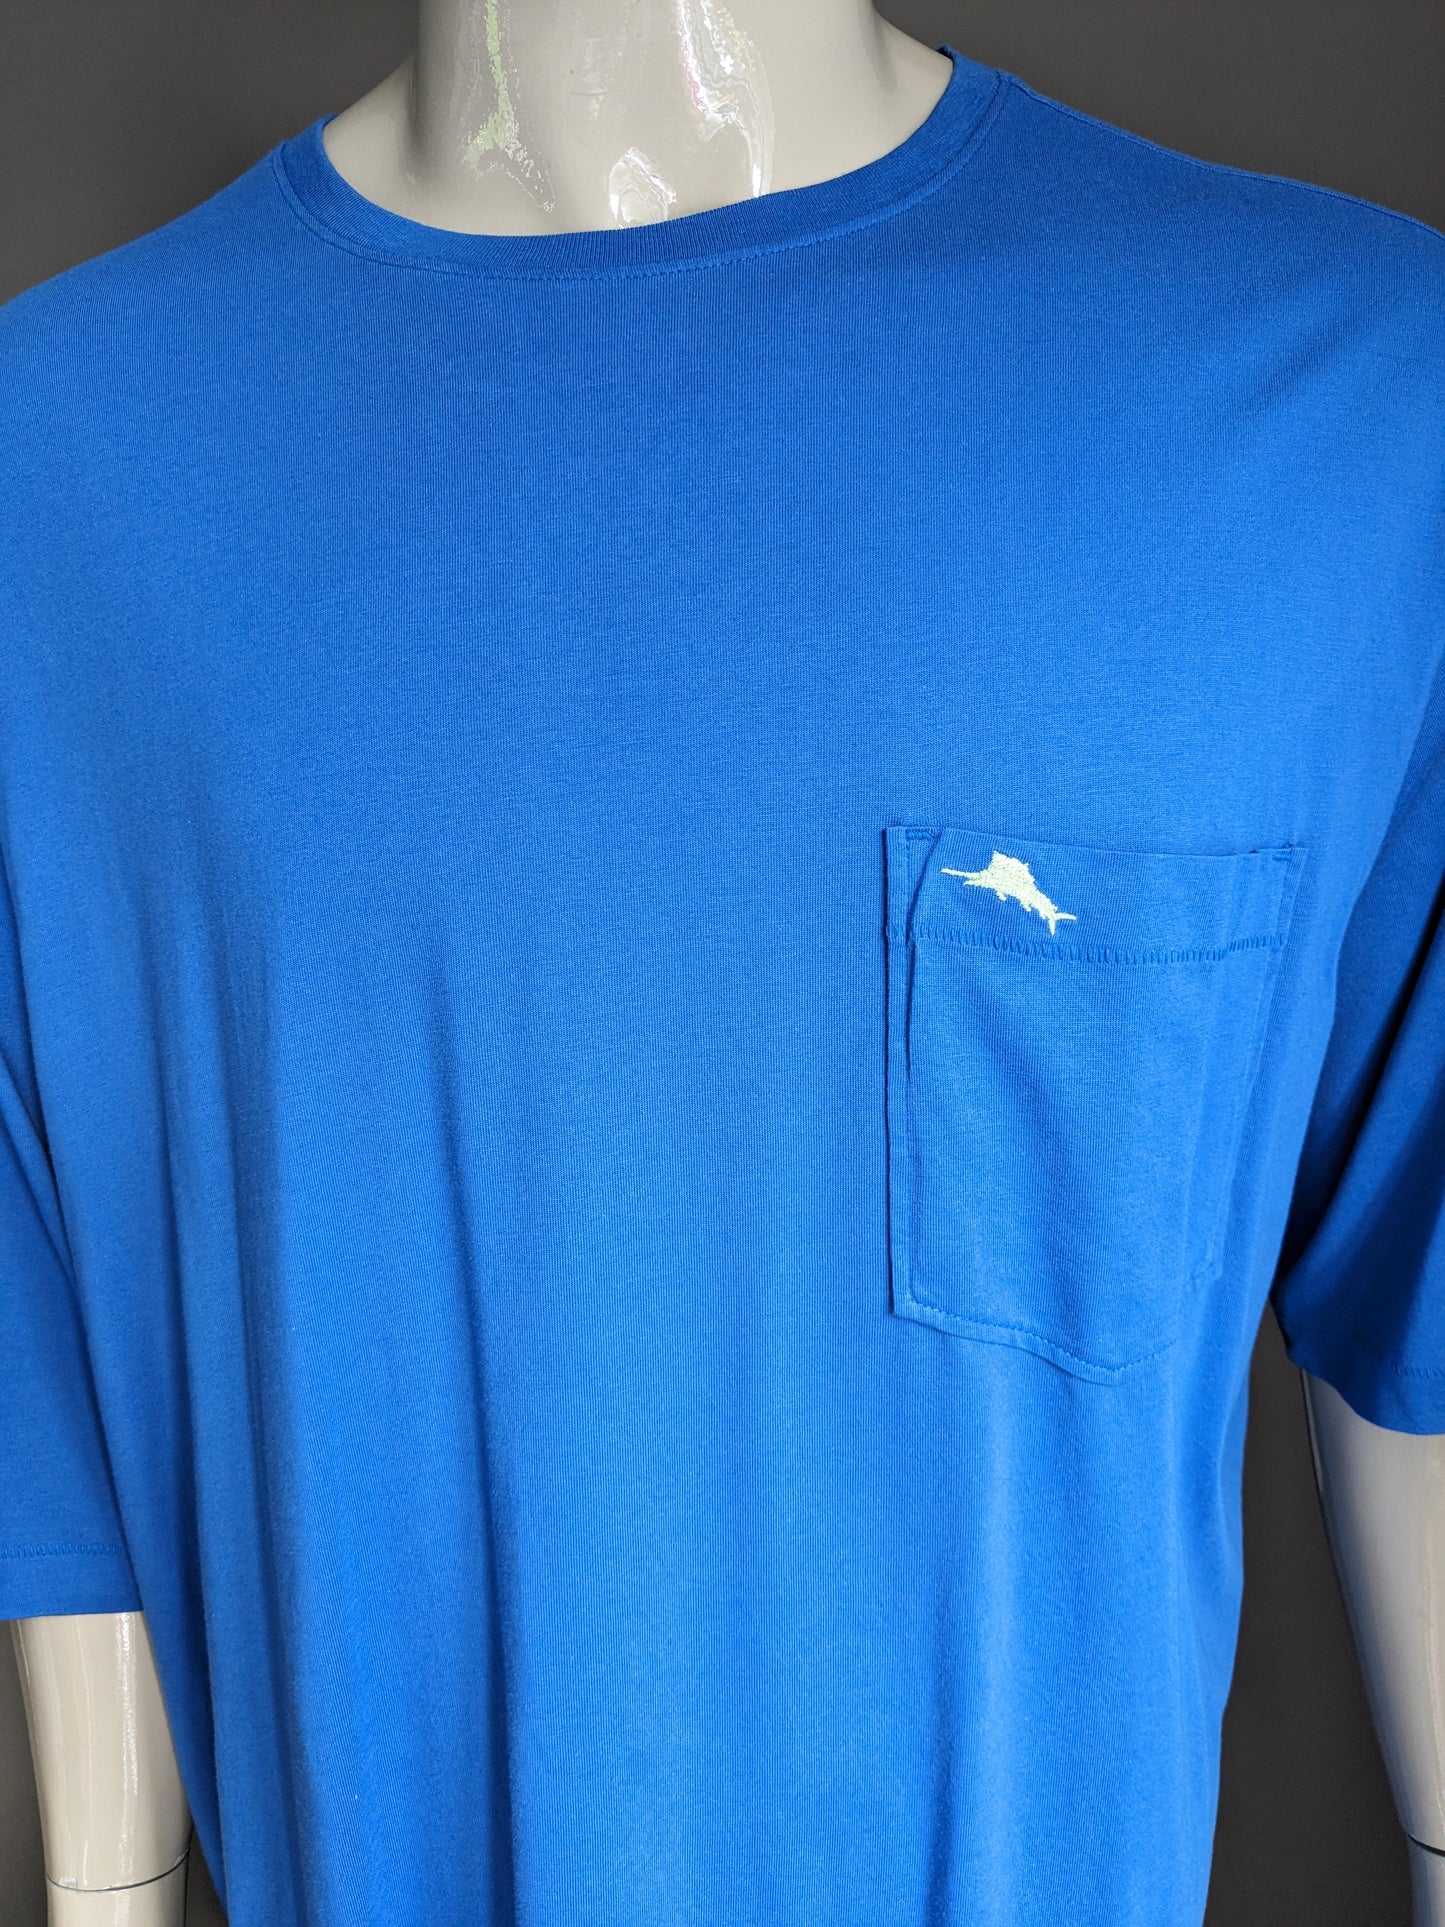 Tommy Bahama Relax shirt. Blue colored. Size 2XL / 3XL.